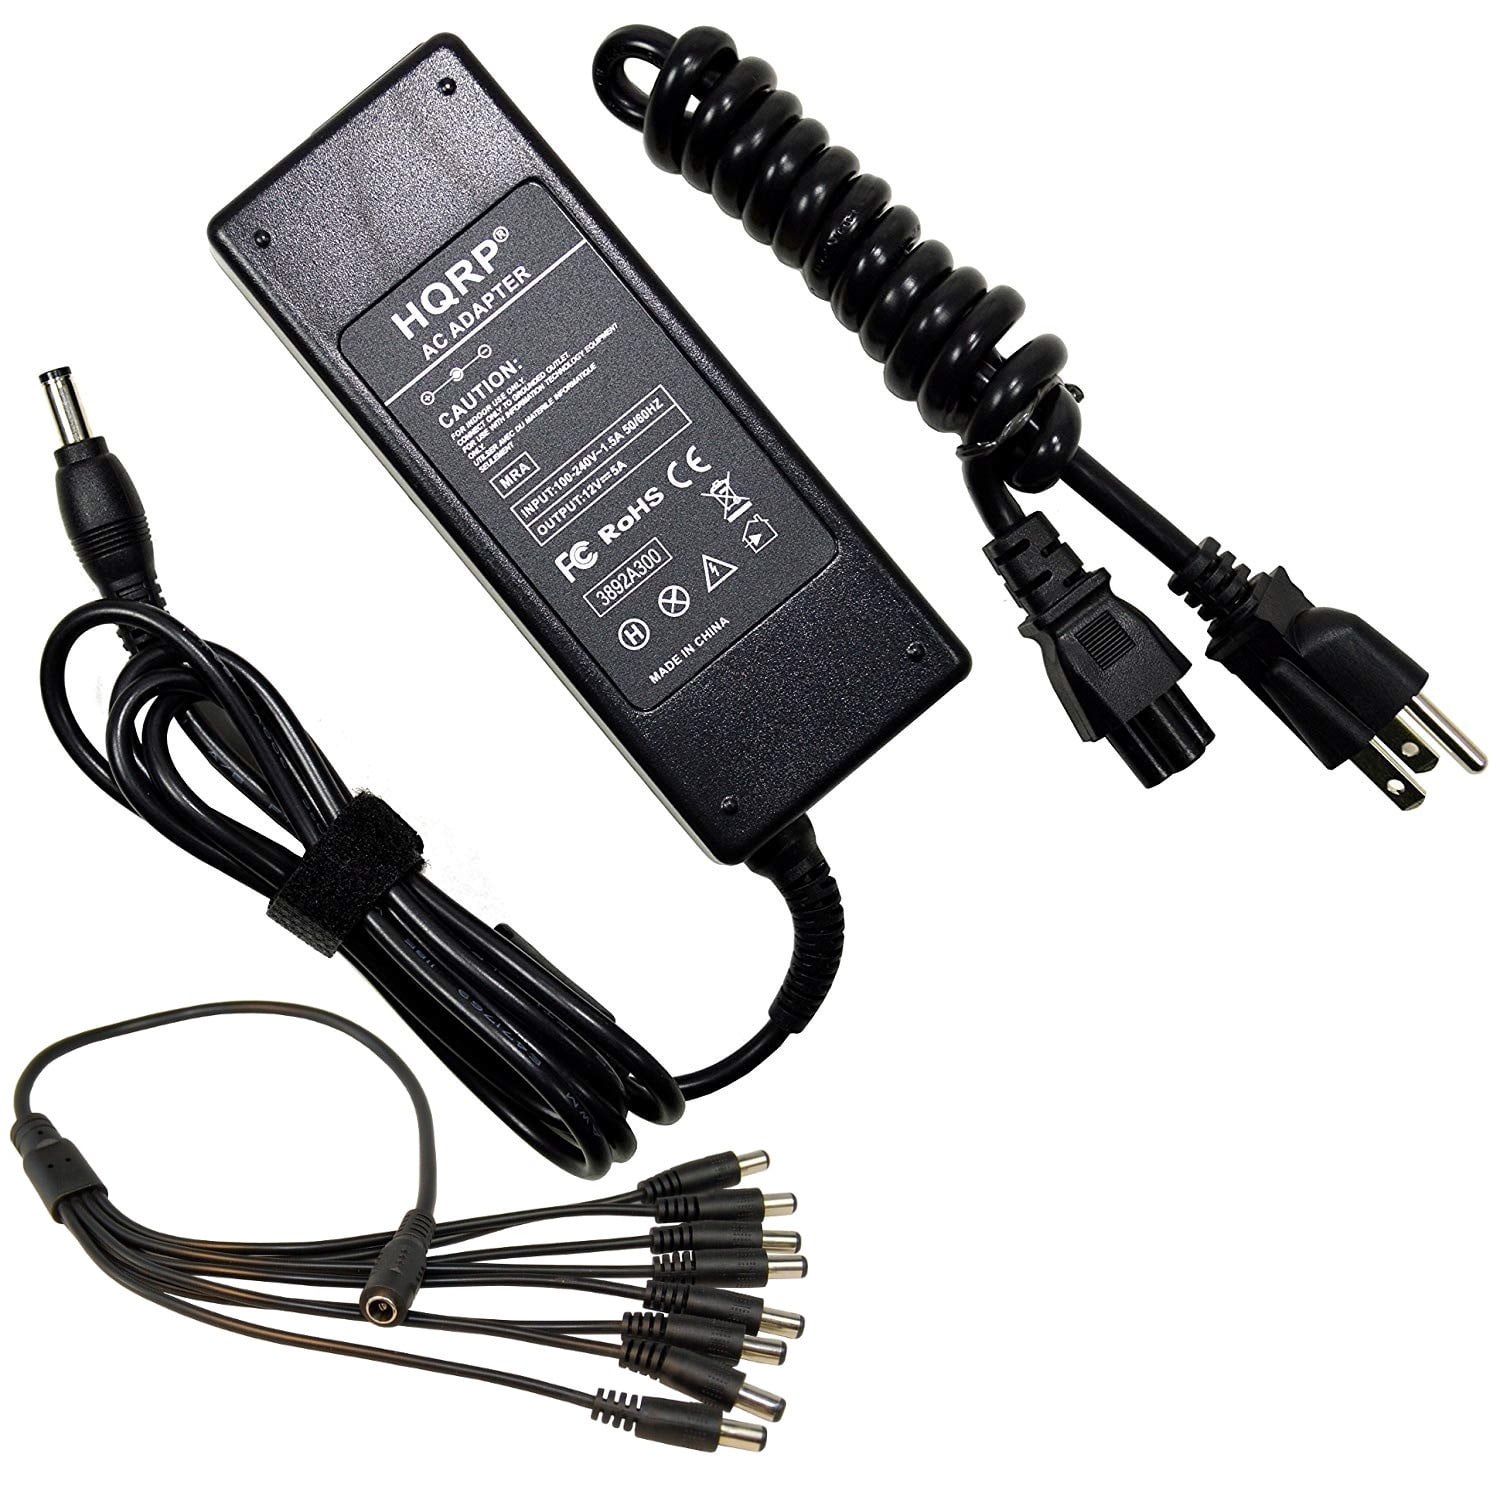 Adapter 12V 5A/10A Power Supply 2/4/6/8 Way Splitter Cable CCTV Camera LED Strip 